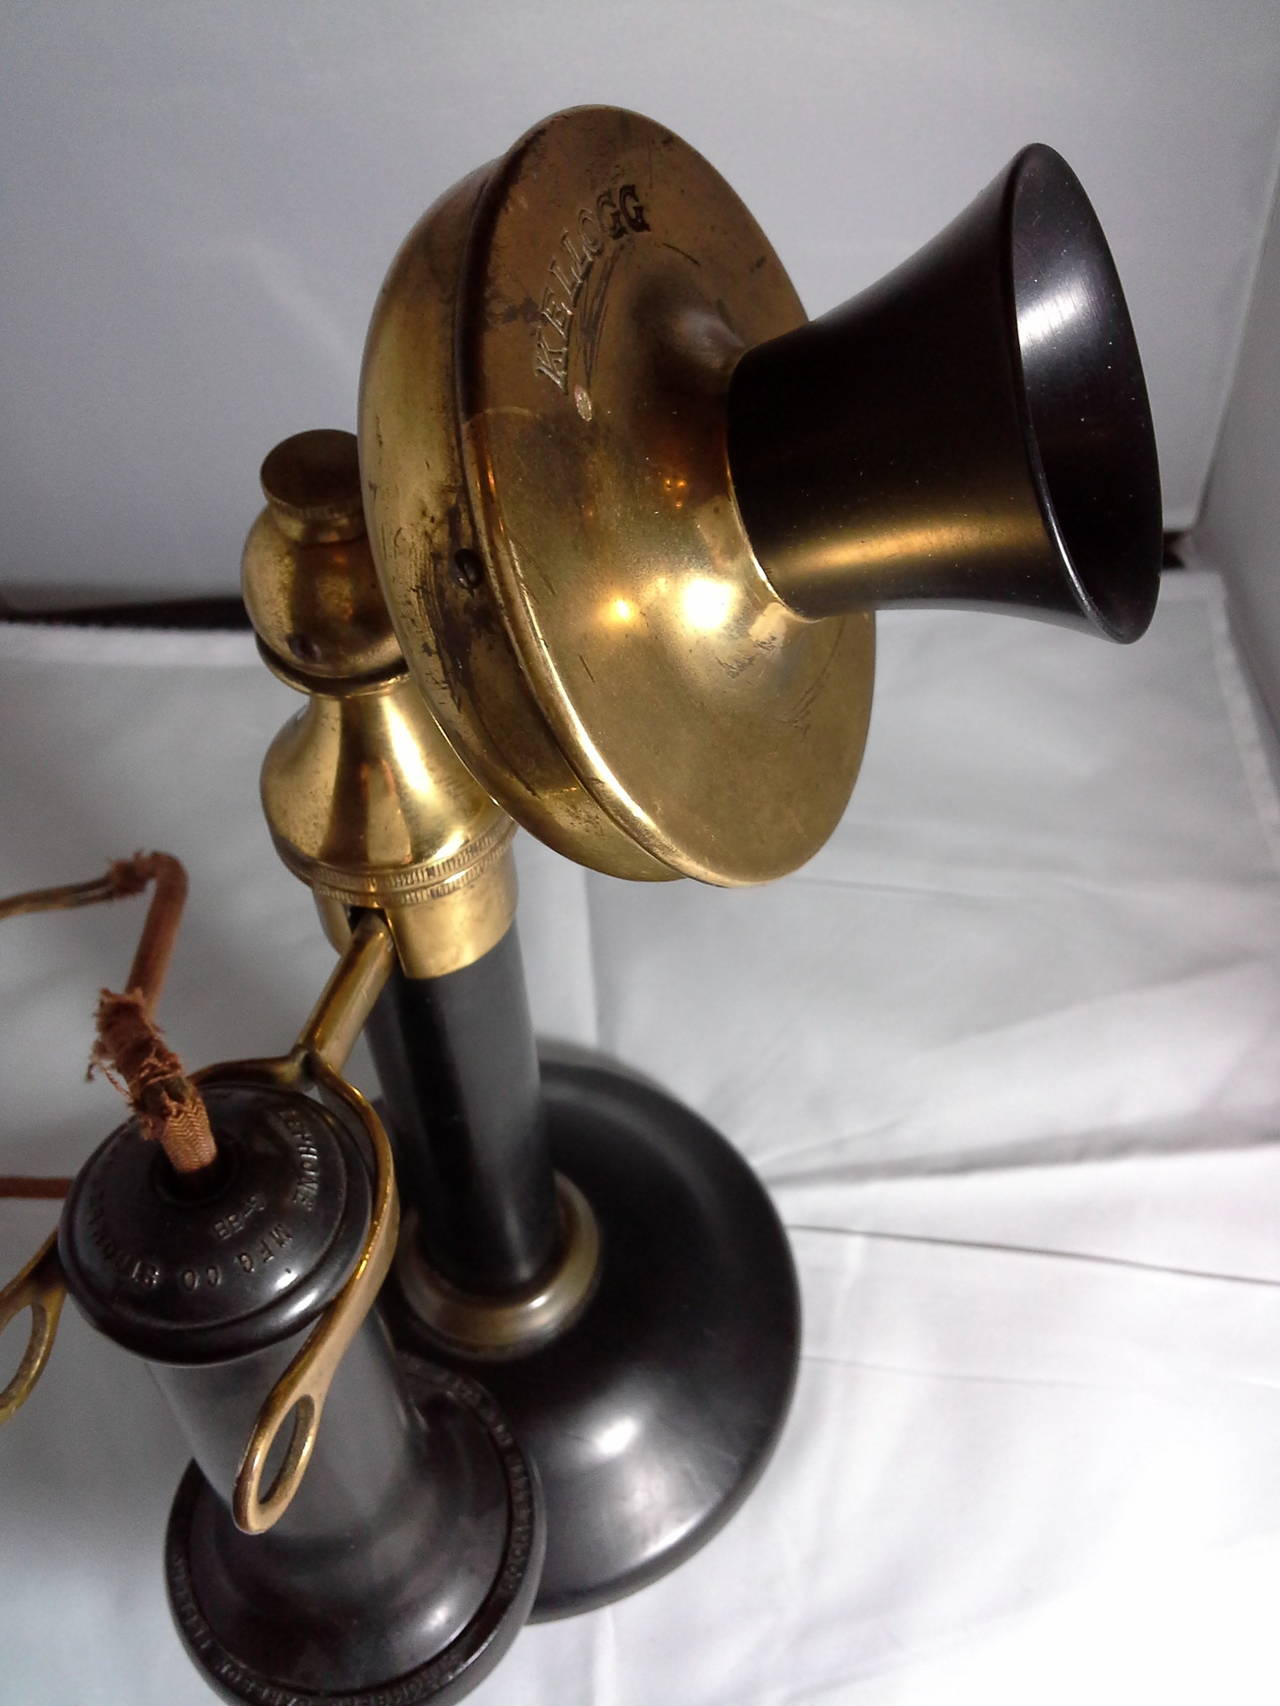 Industrial Kellogg Chicago Candlestick Brass and Bakelite, Patented 1901